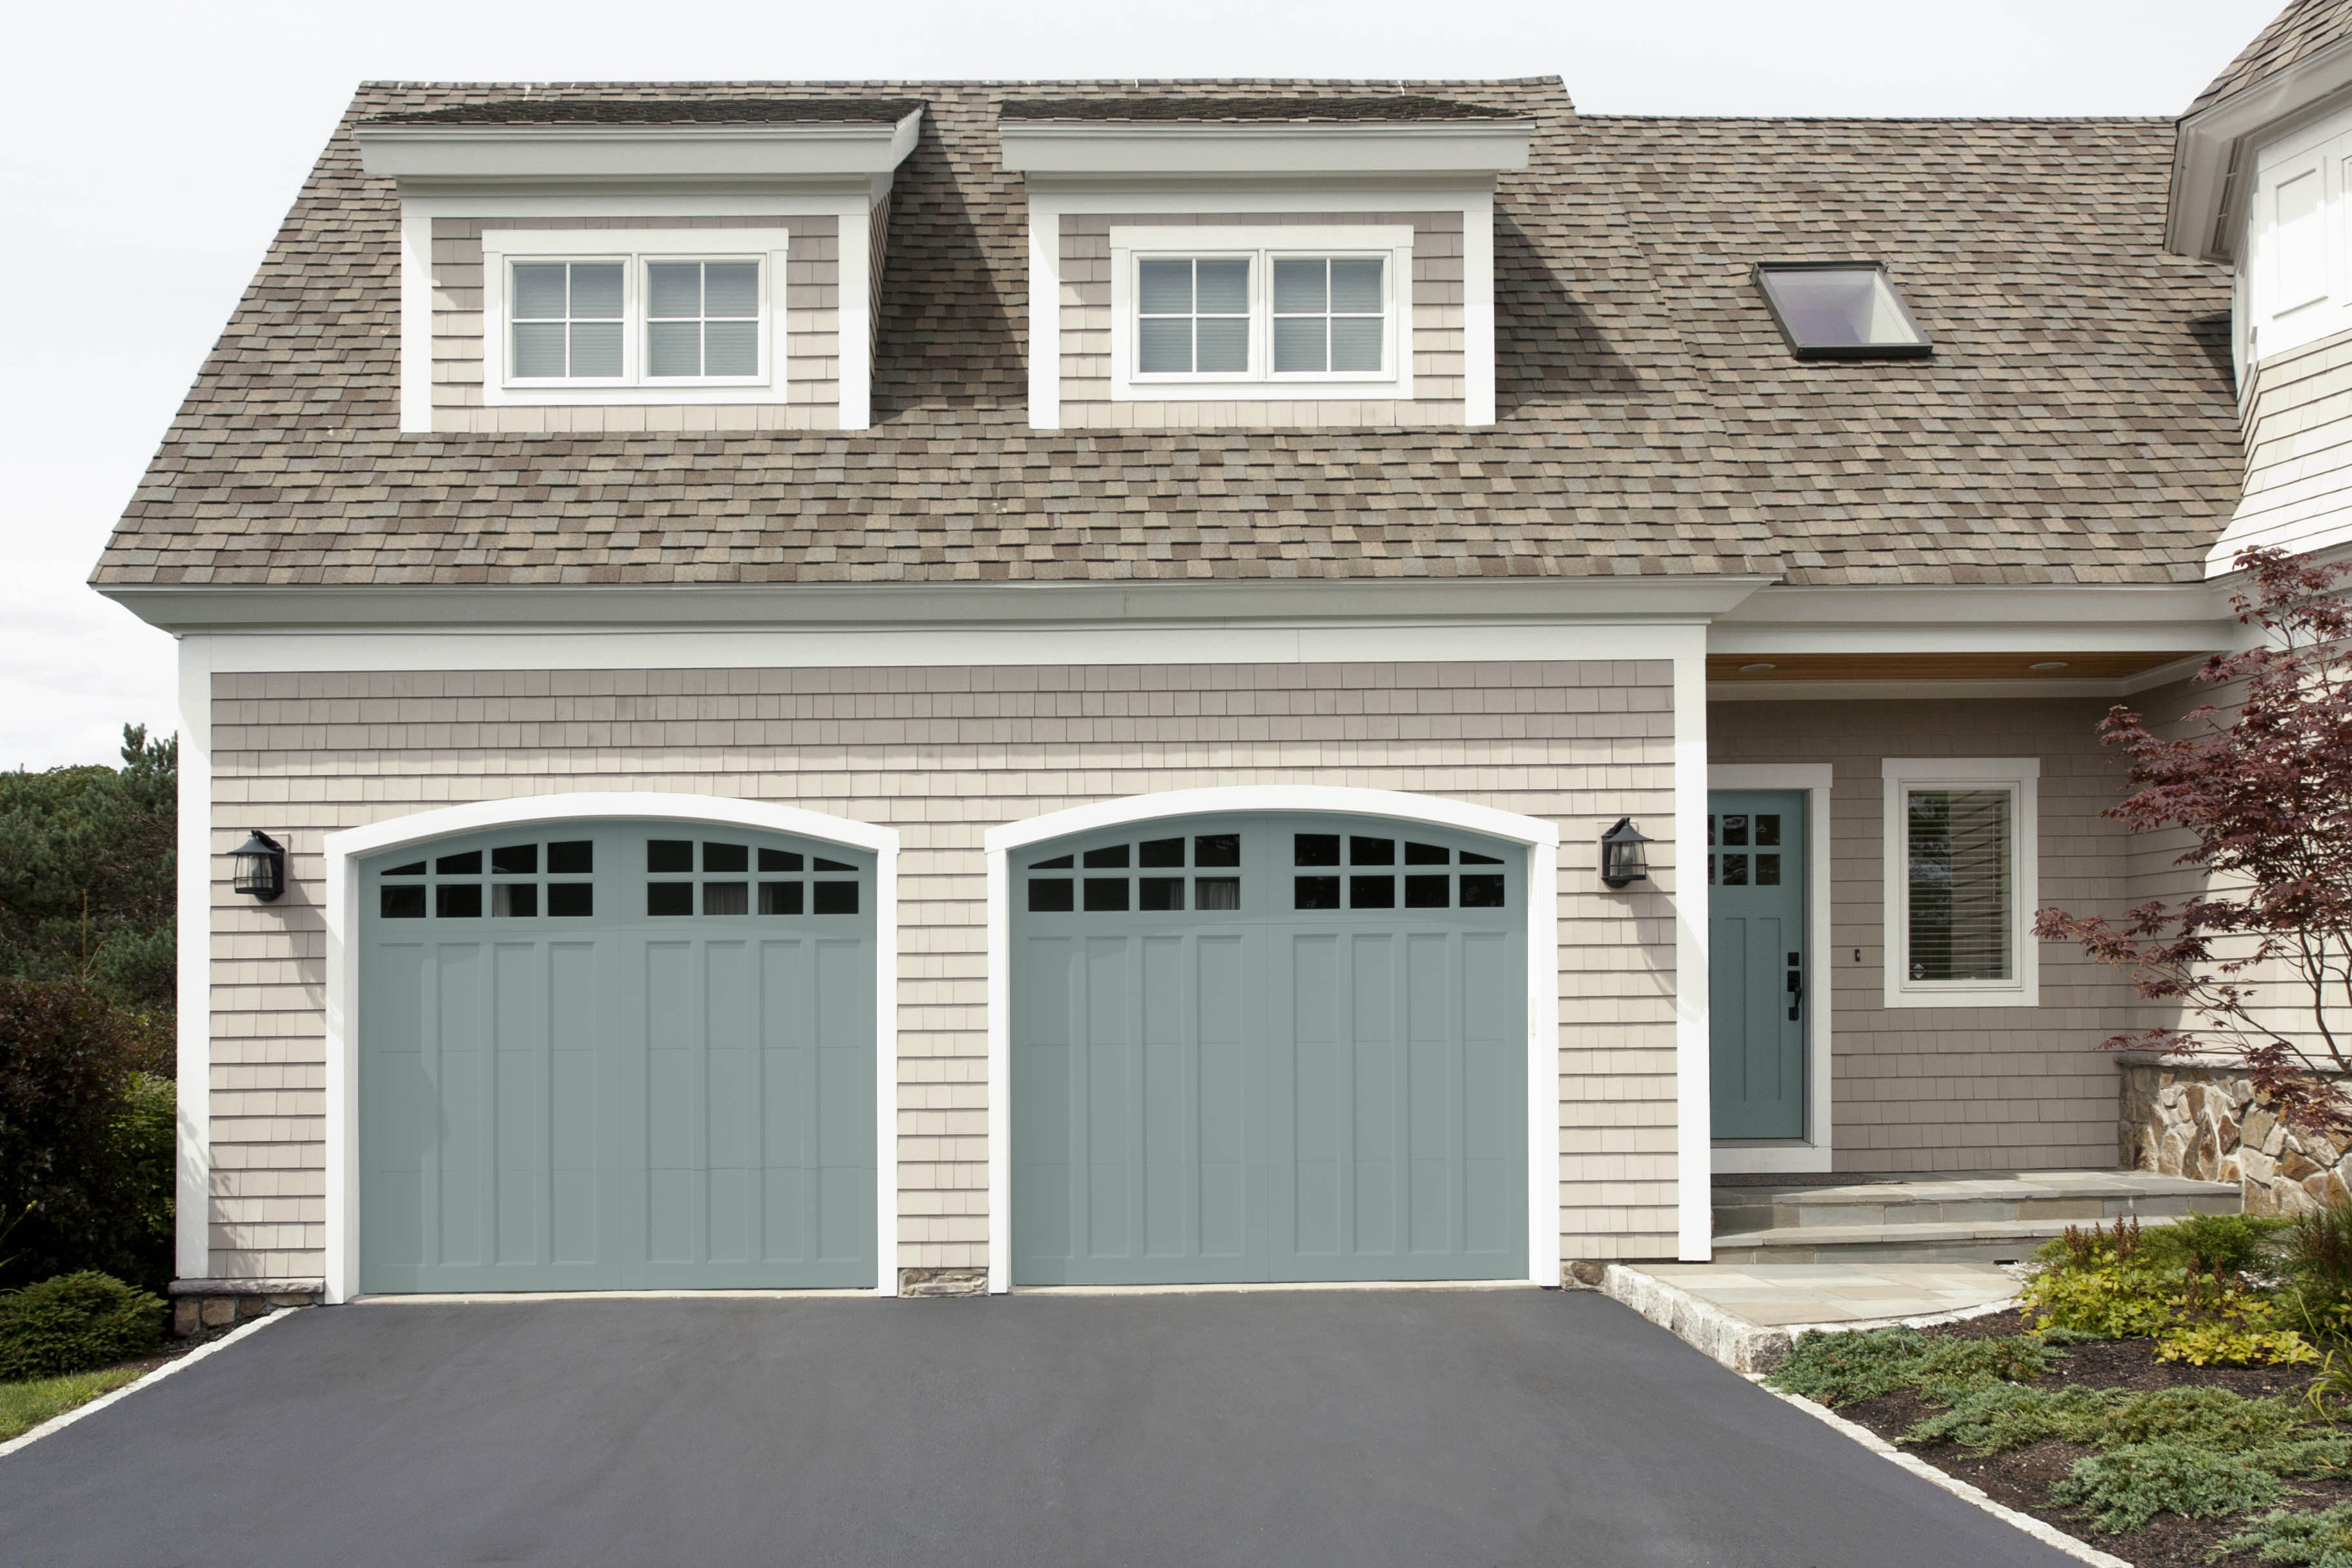 The exterior of a house with the front door and garage doors painted in a dusty blue green colour